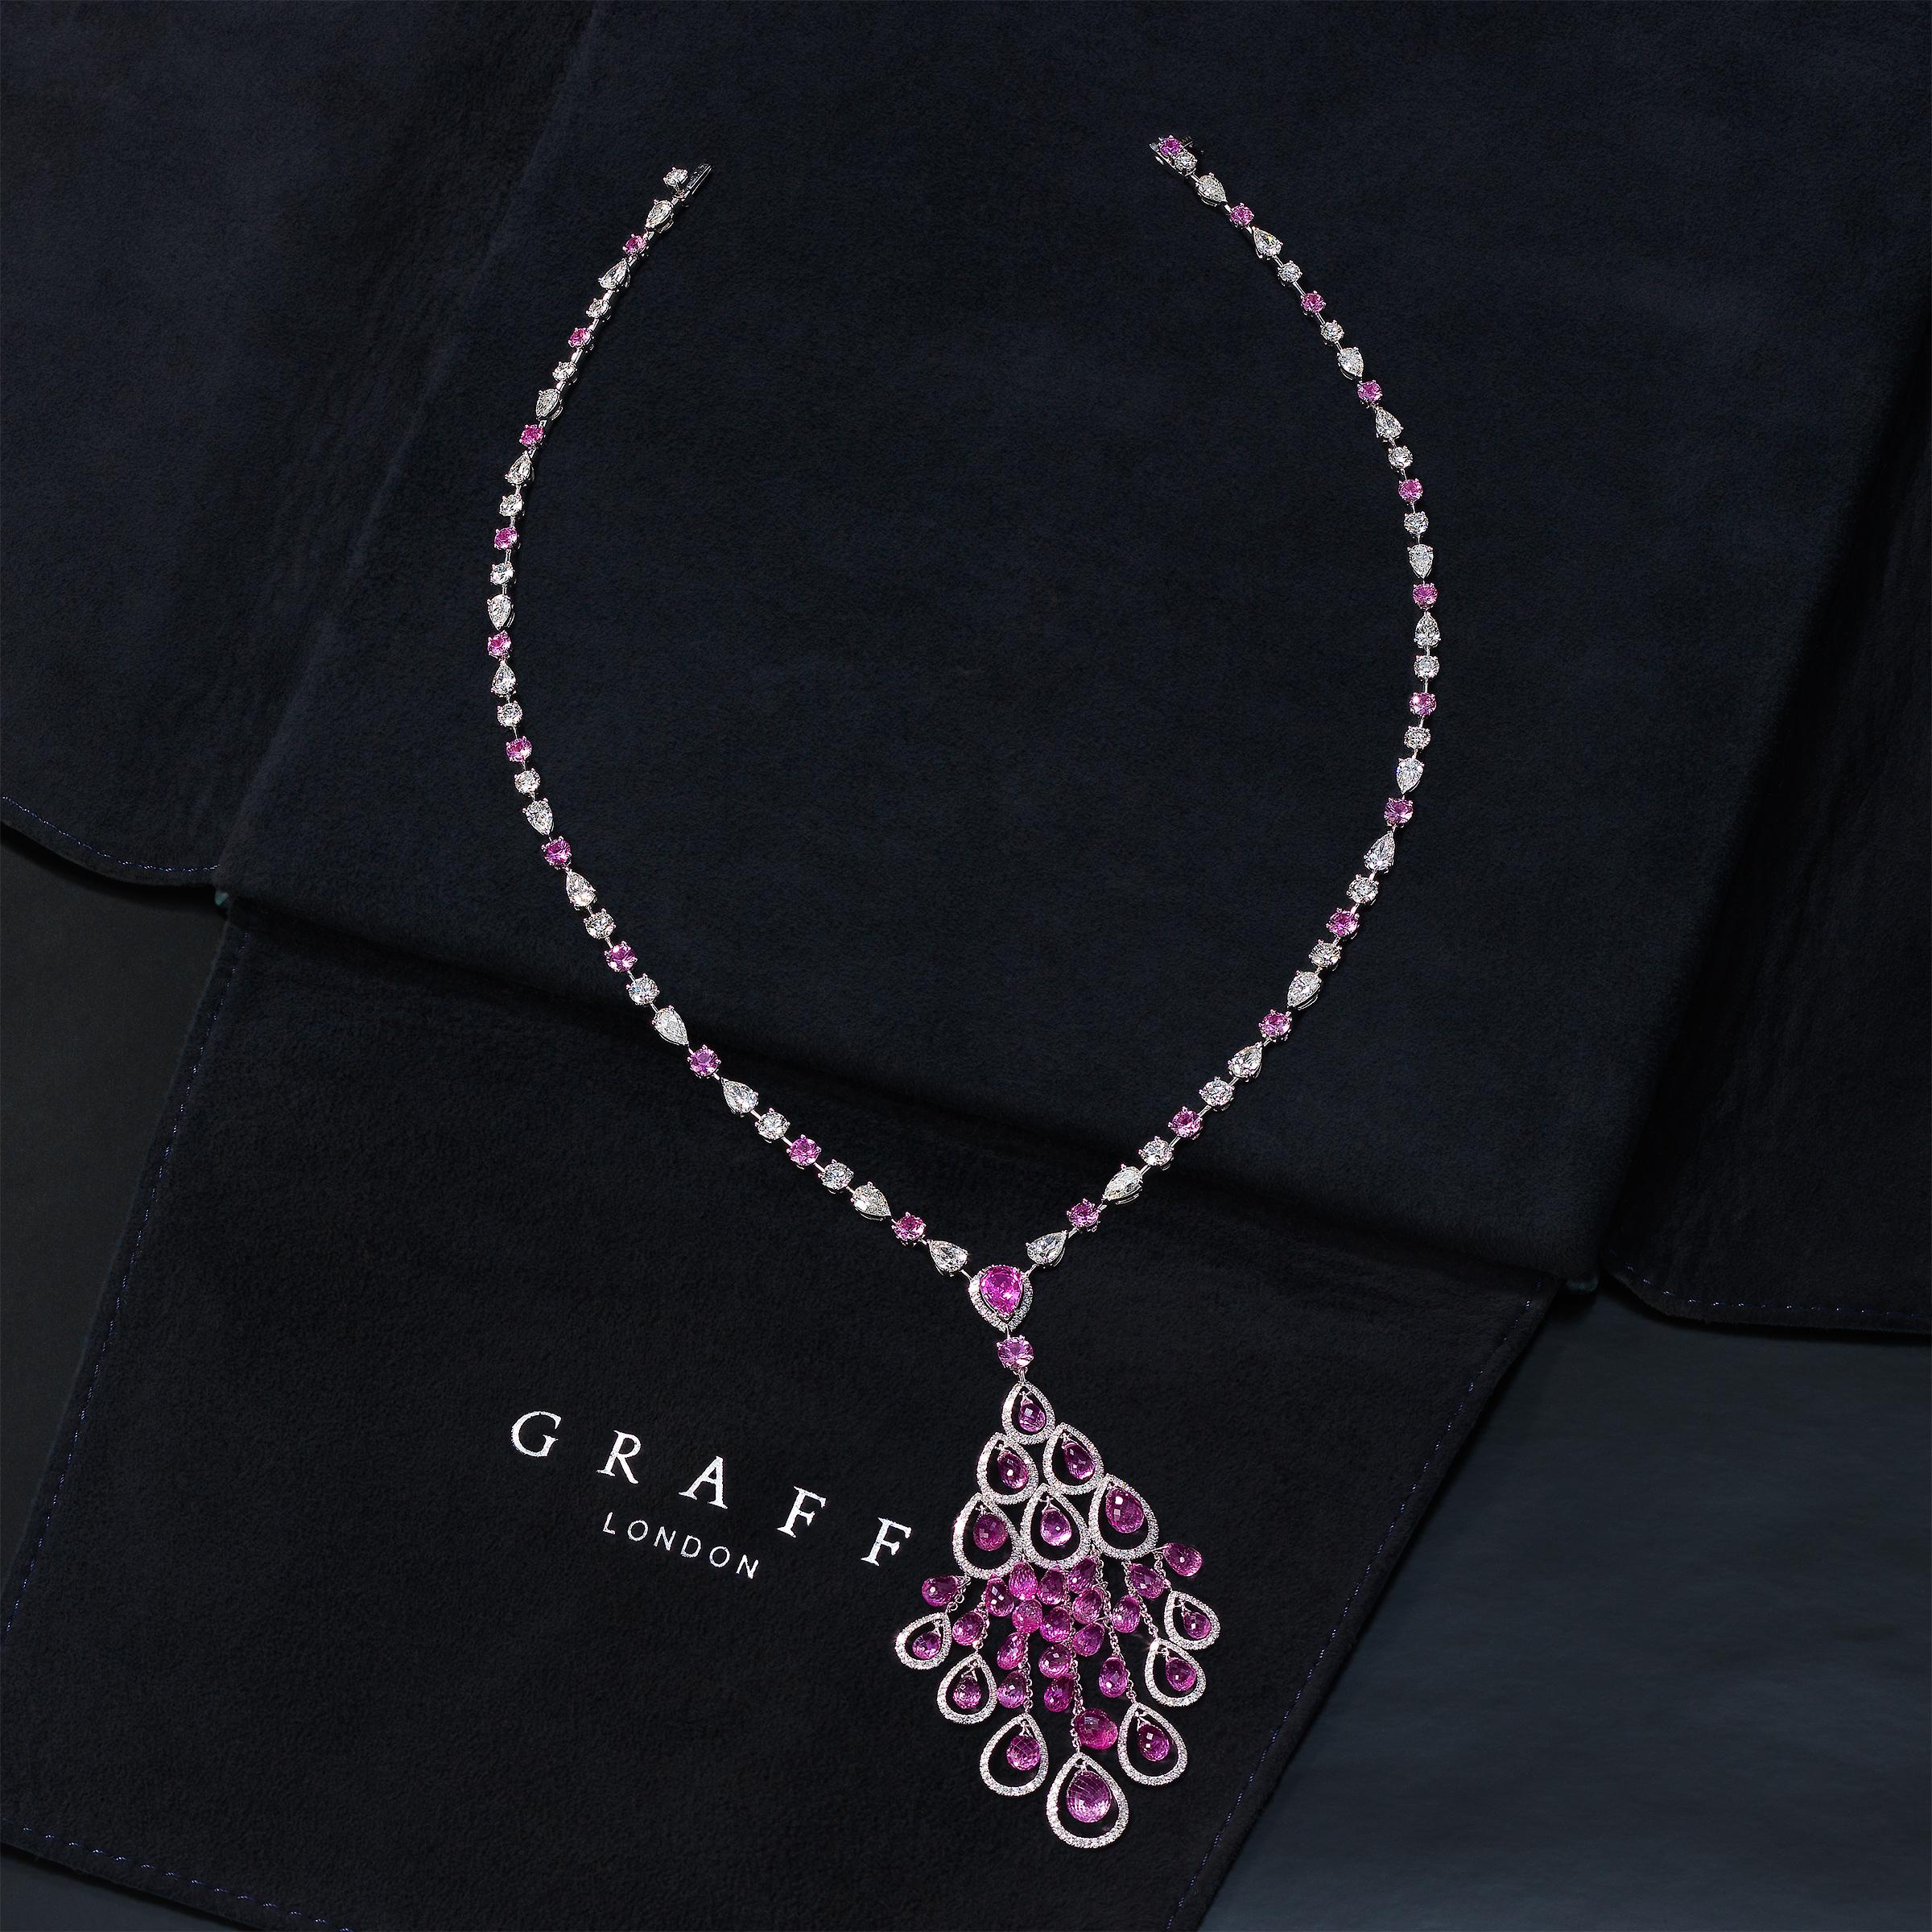 Mixed Cut Graff Diamond Pink Sapphire Necklace in 18k Gold 